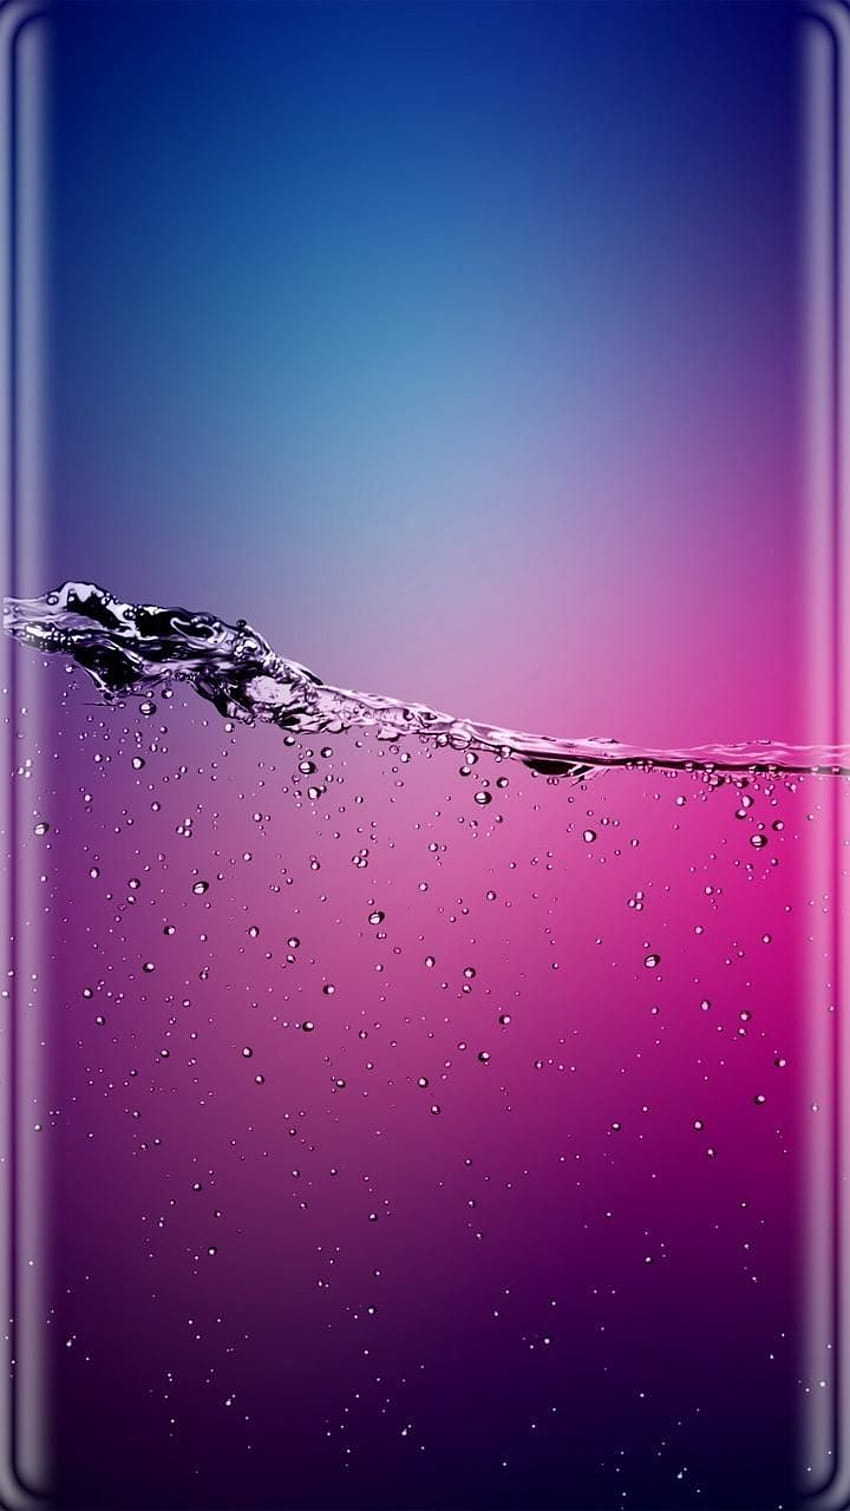 Edge, special amoled curved HD phone wallpaper